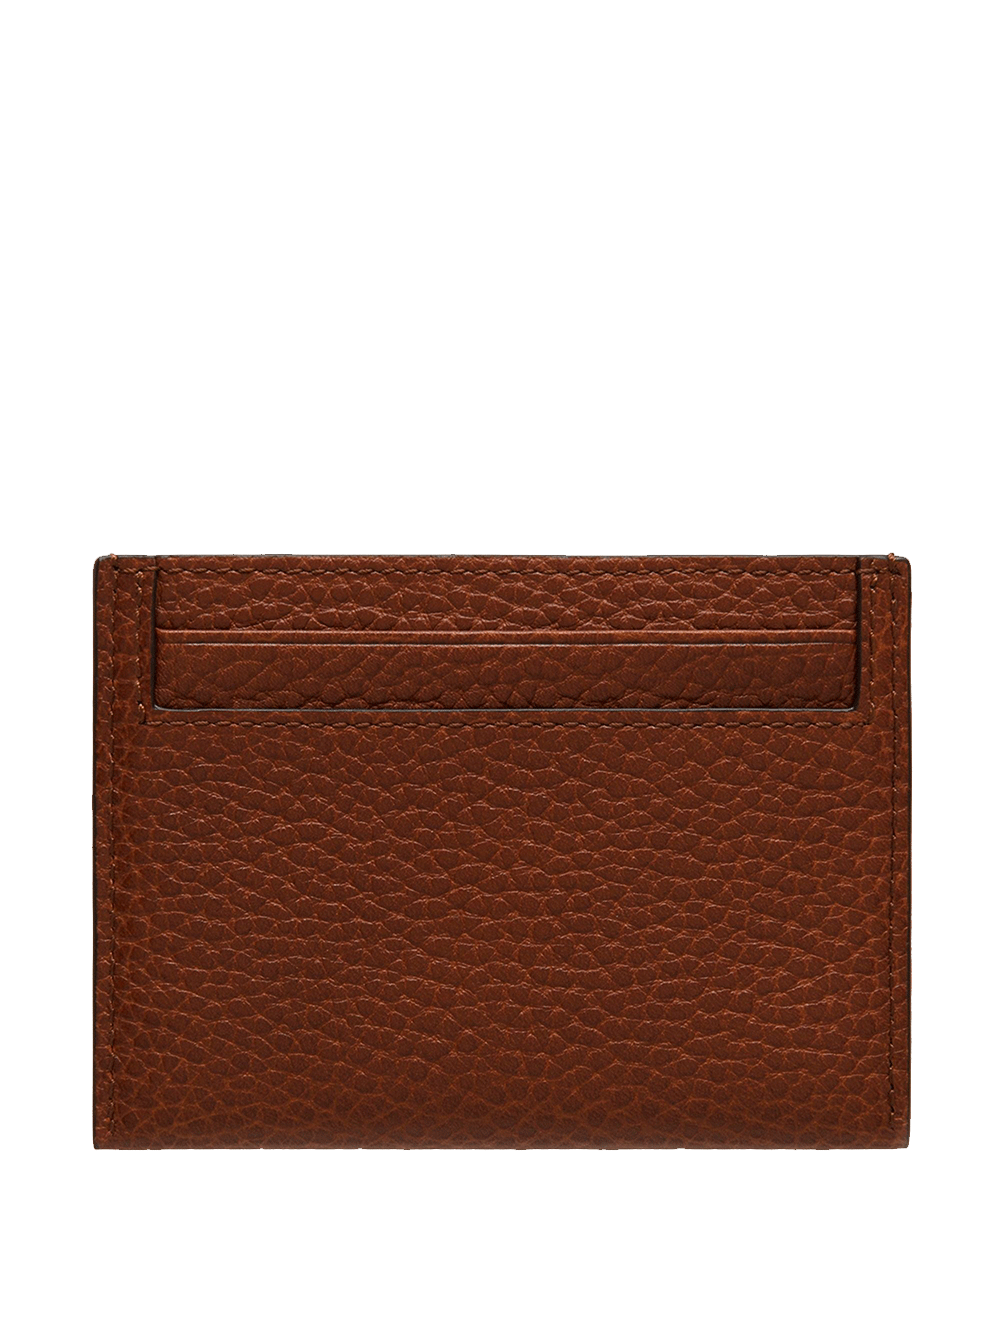 Mulberry Credit Card Slip Two Tone Scg Brown 2